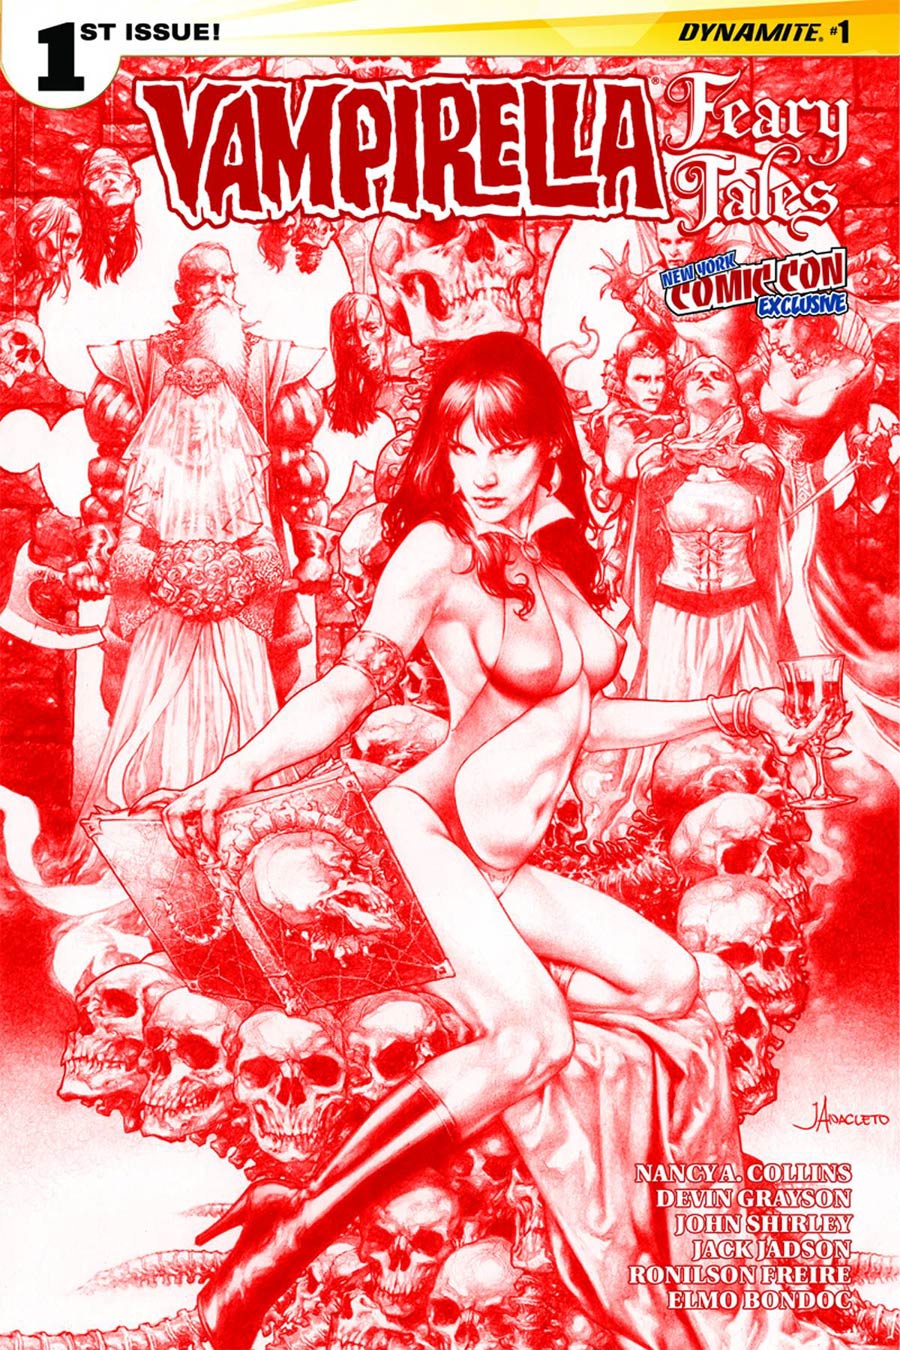 Vampirella Feary Tales #1 Cover M NYCC Exclusive Jay Anacleto Blood Red Cover